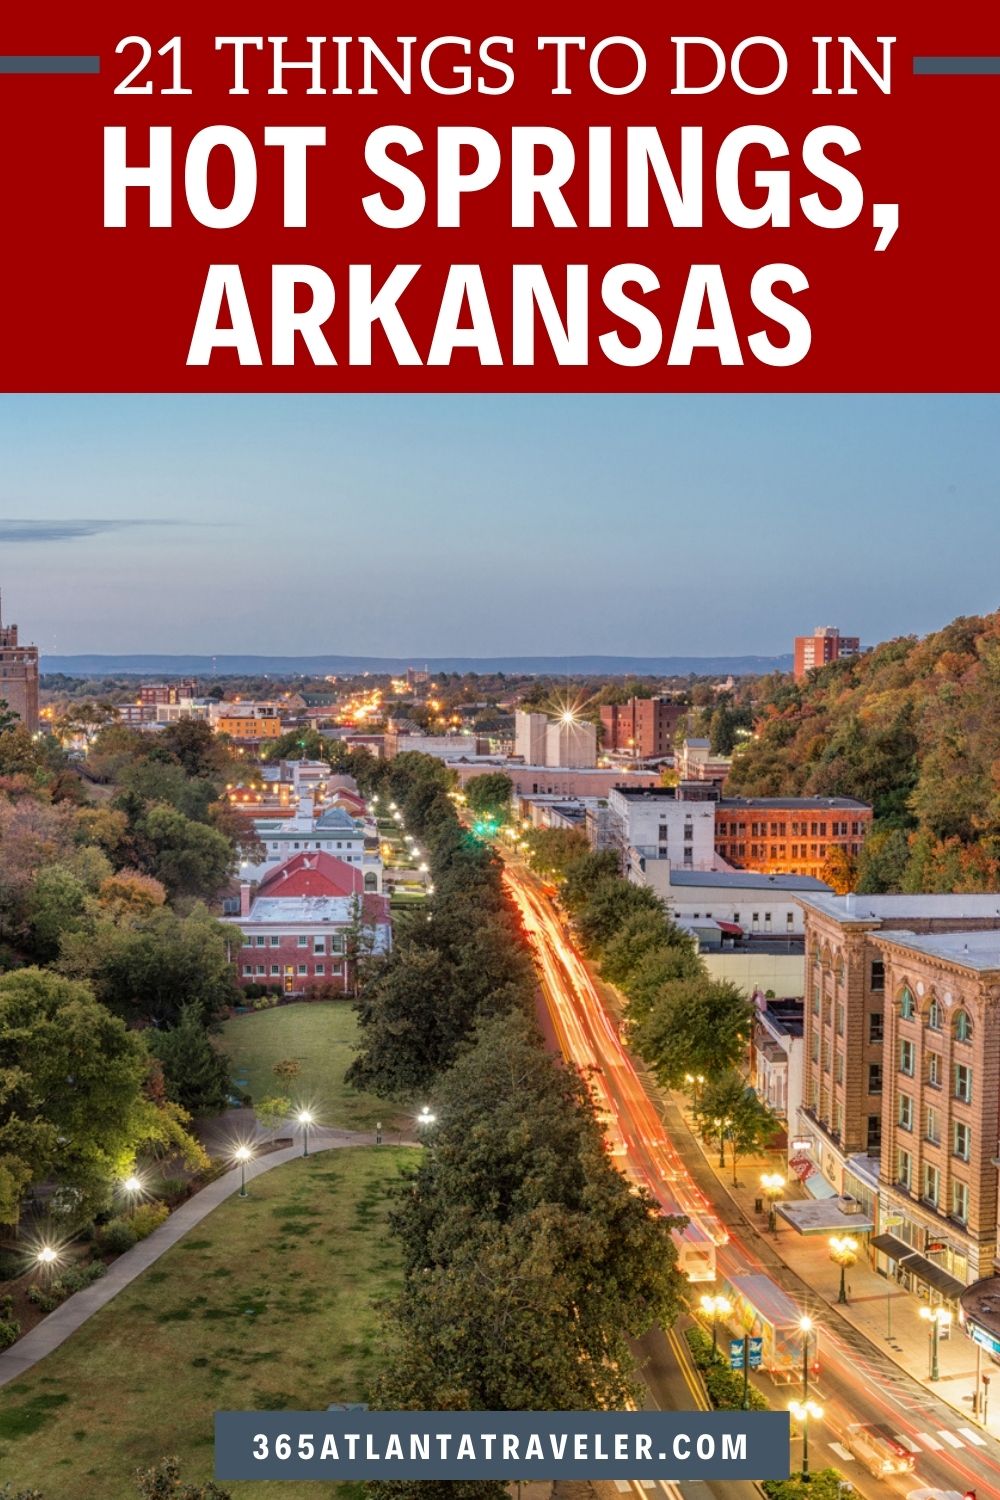 21 Amazing Things To Do in Hot Springs Arkansas